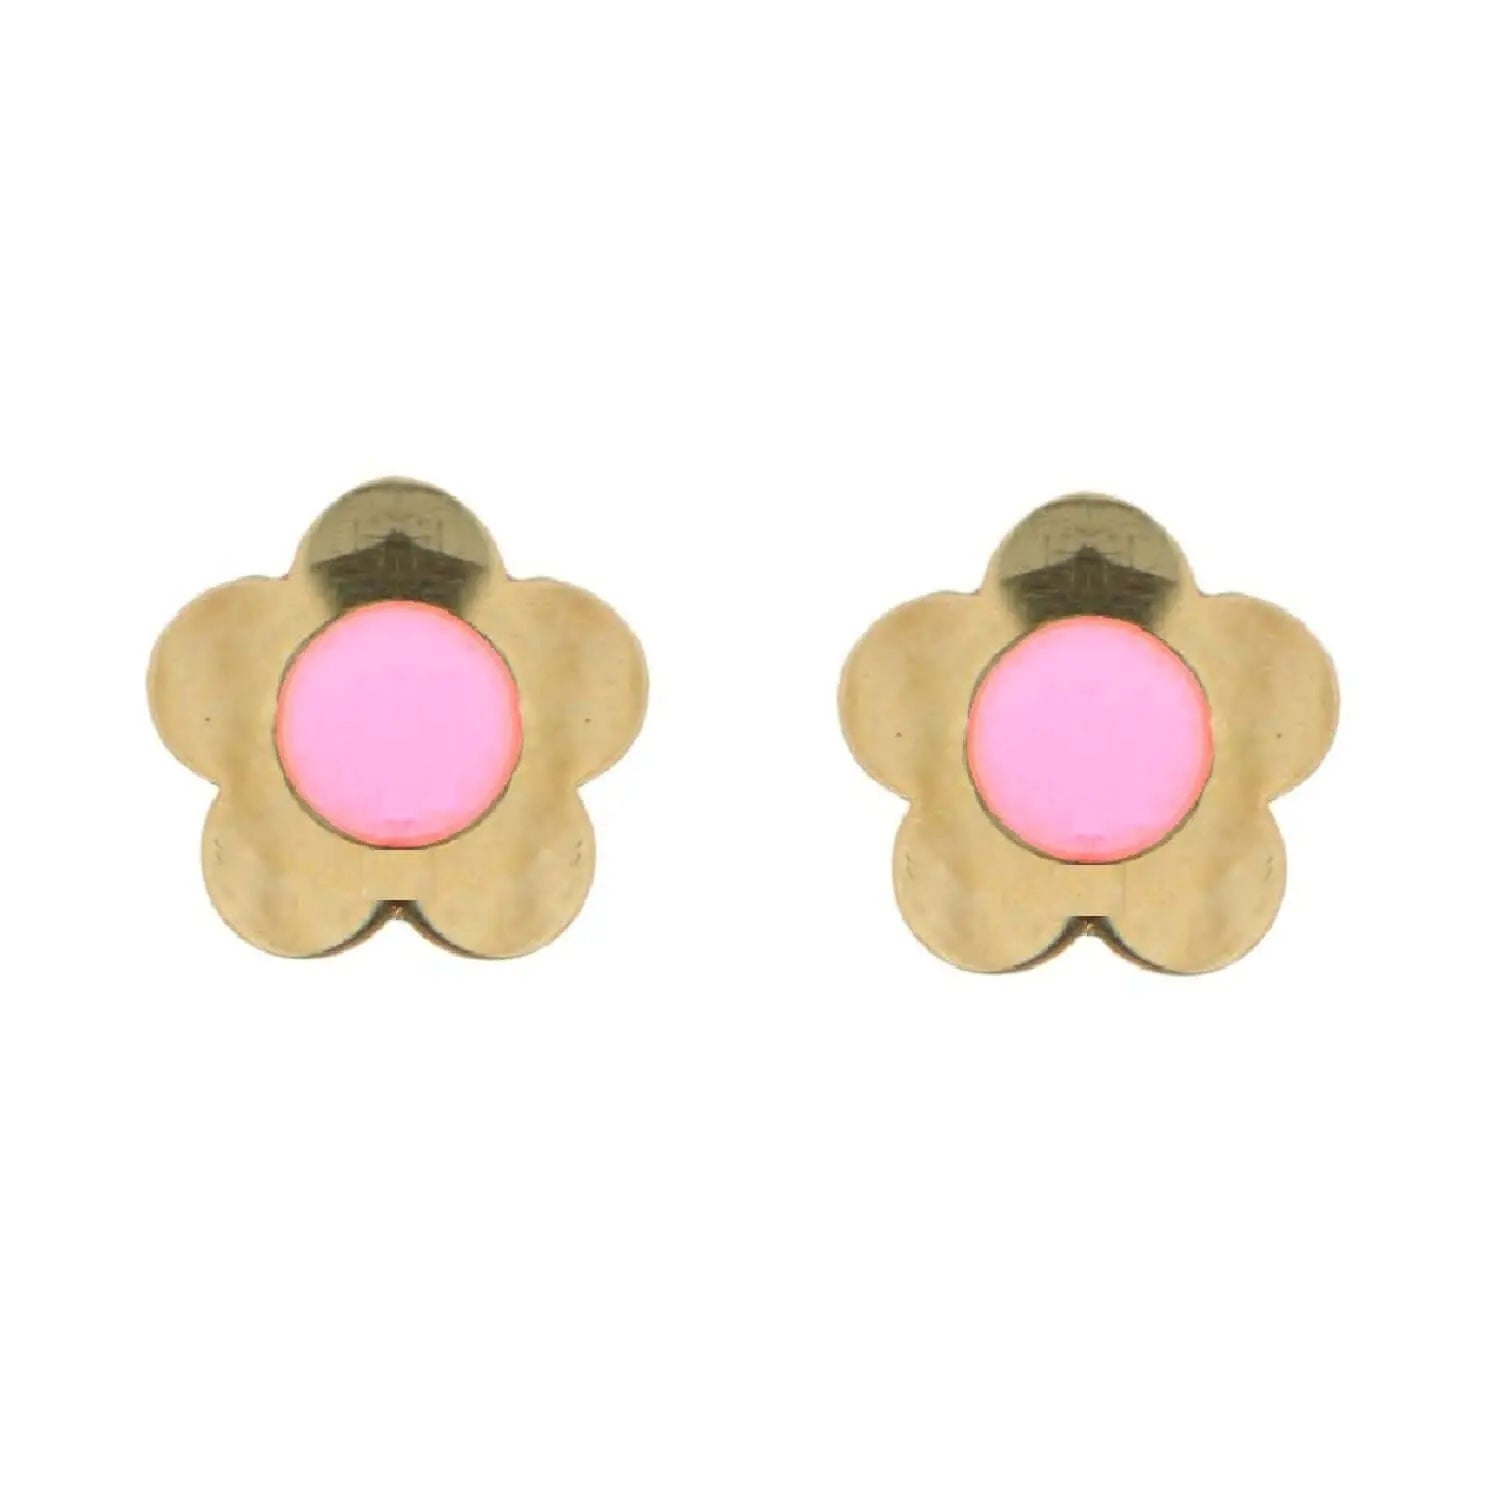 LV Fine Jewellery Star Blossom Earrings Studs with Diamonds in 18K Pink Gold